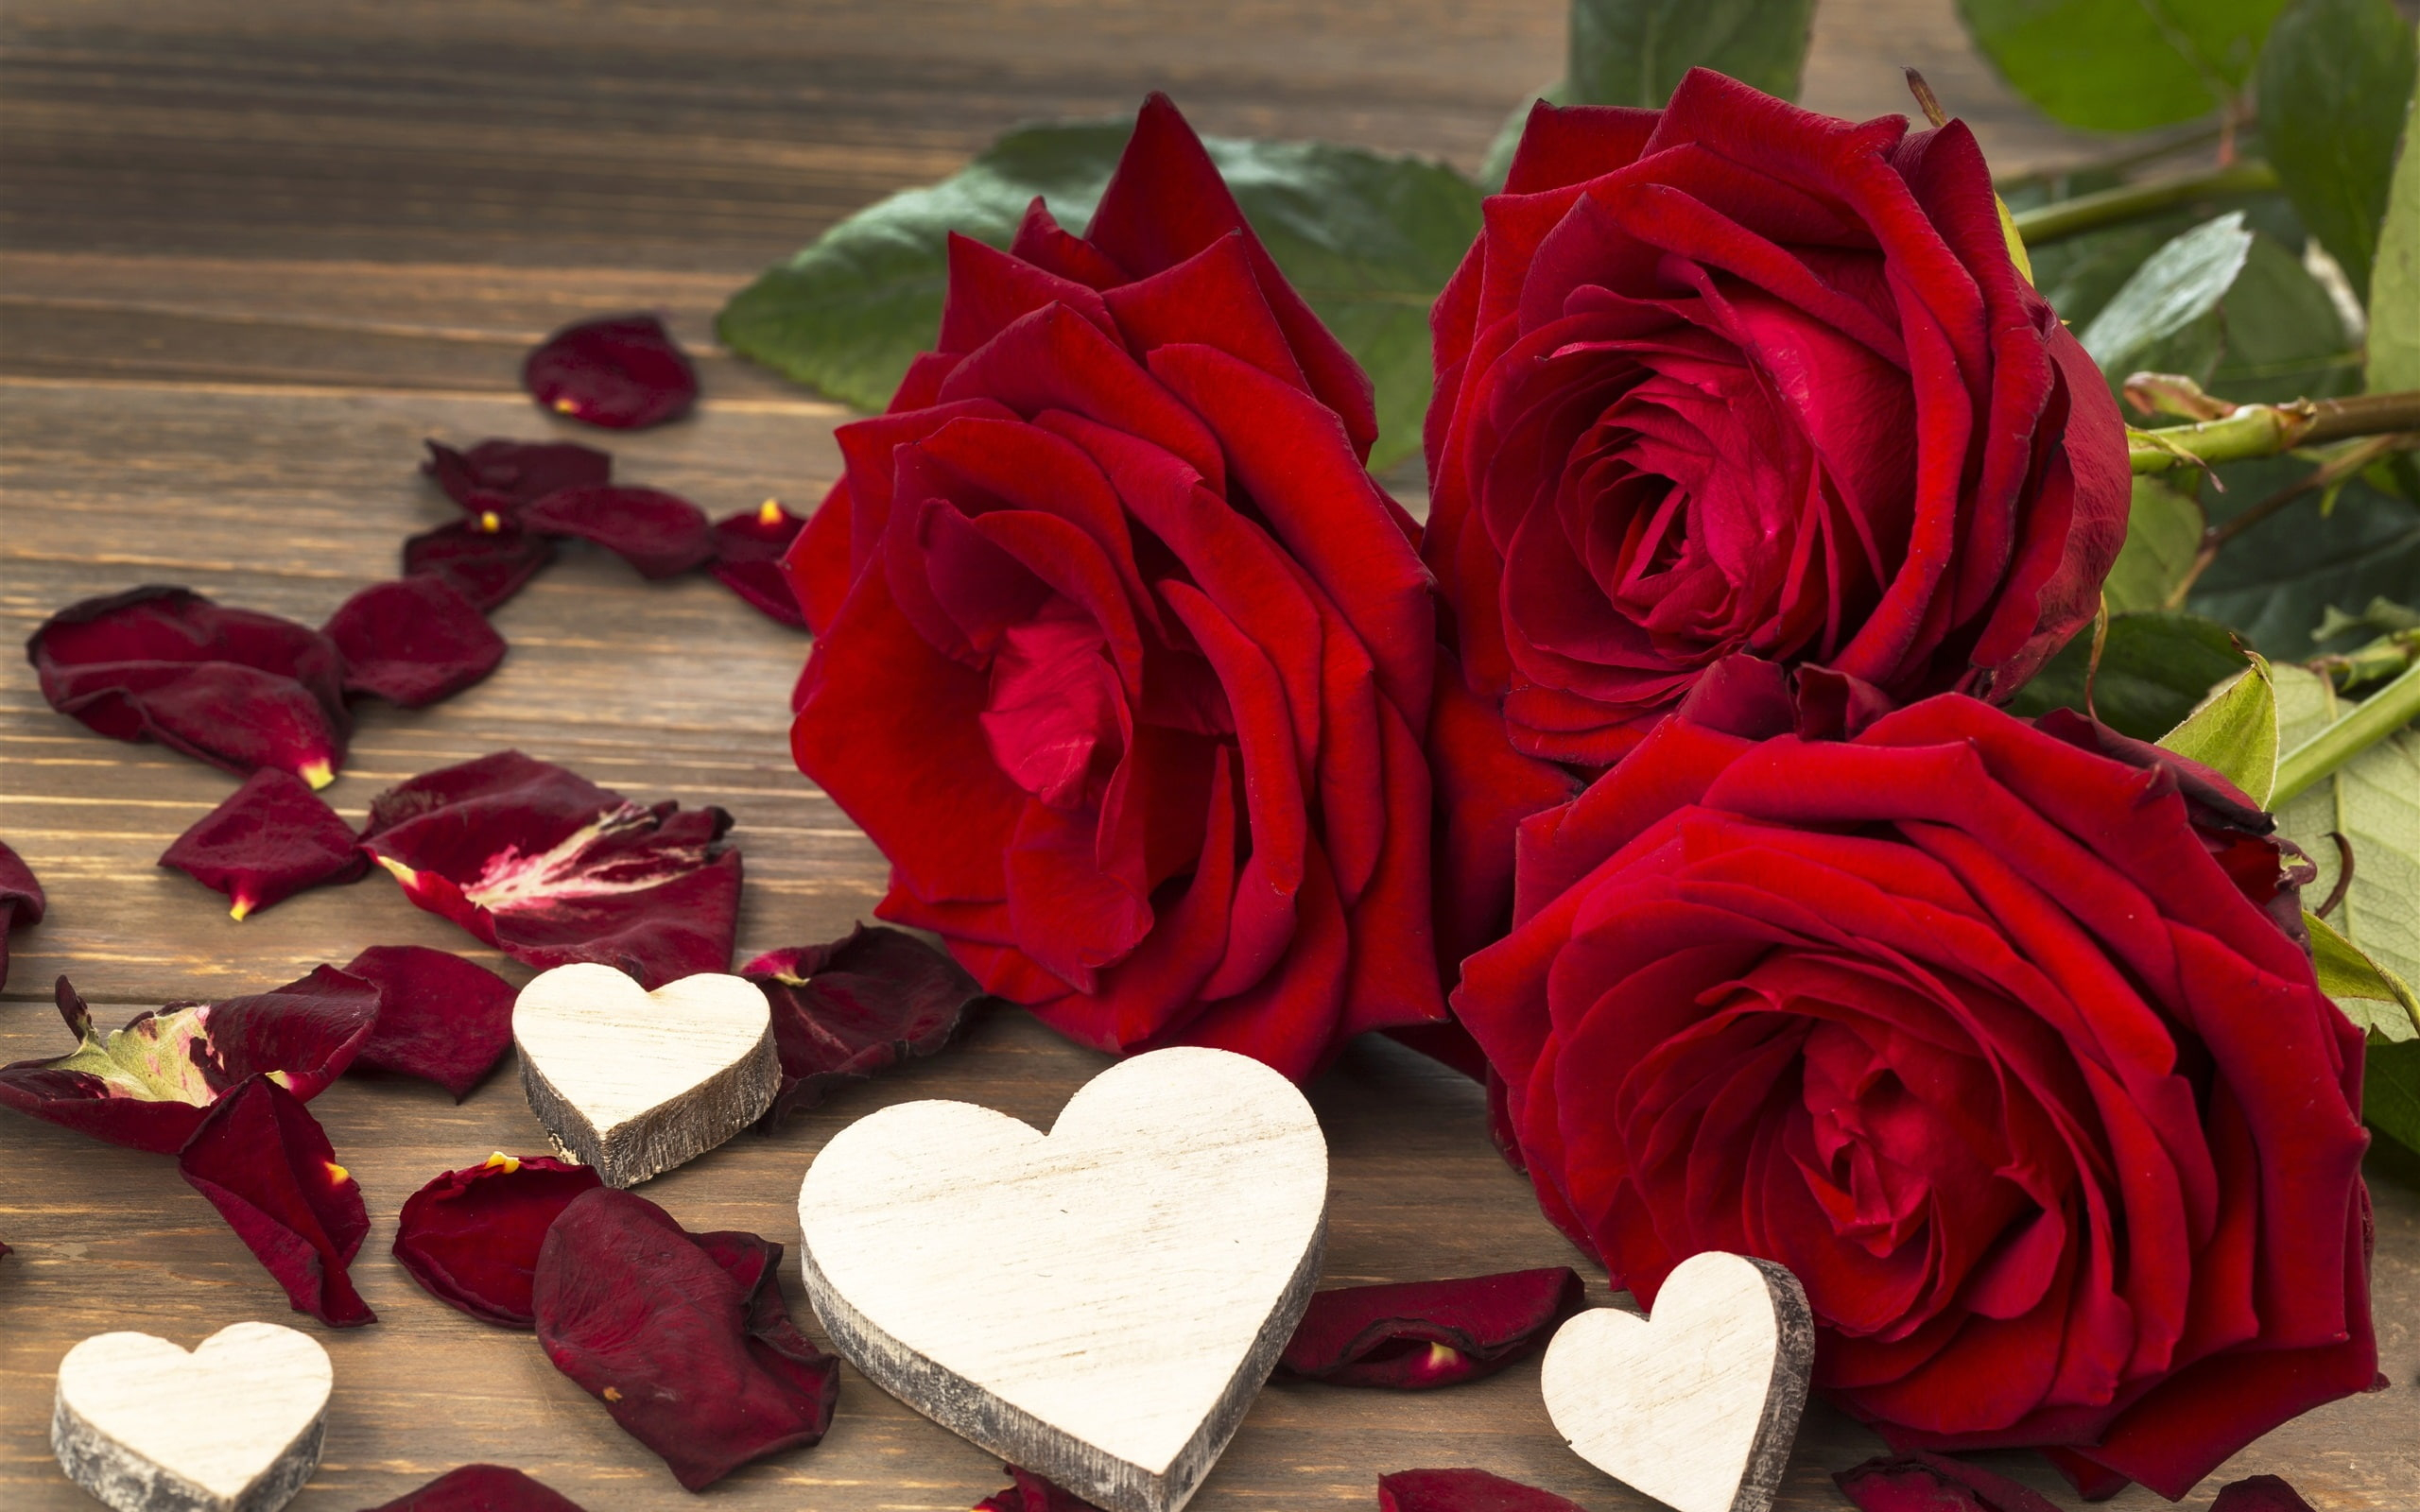 Red rose, flowers, love, Valentine’s day, three red flowers wallpaper